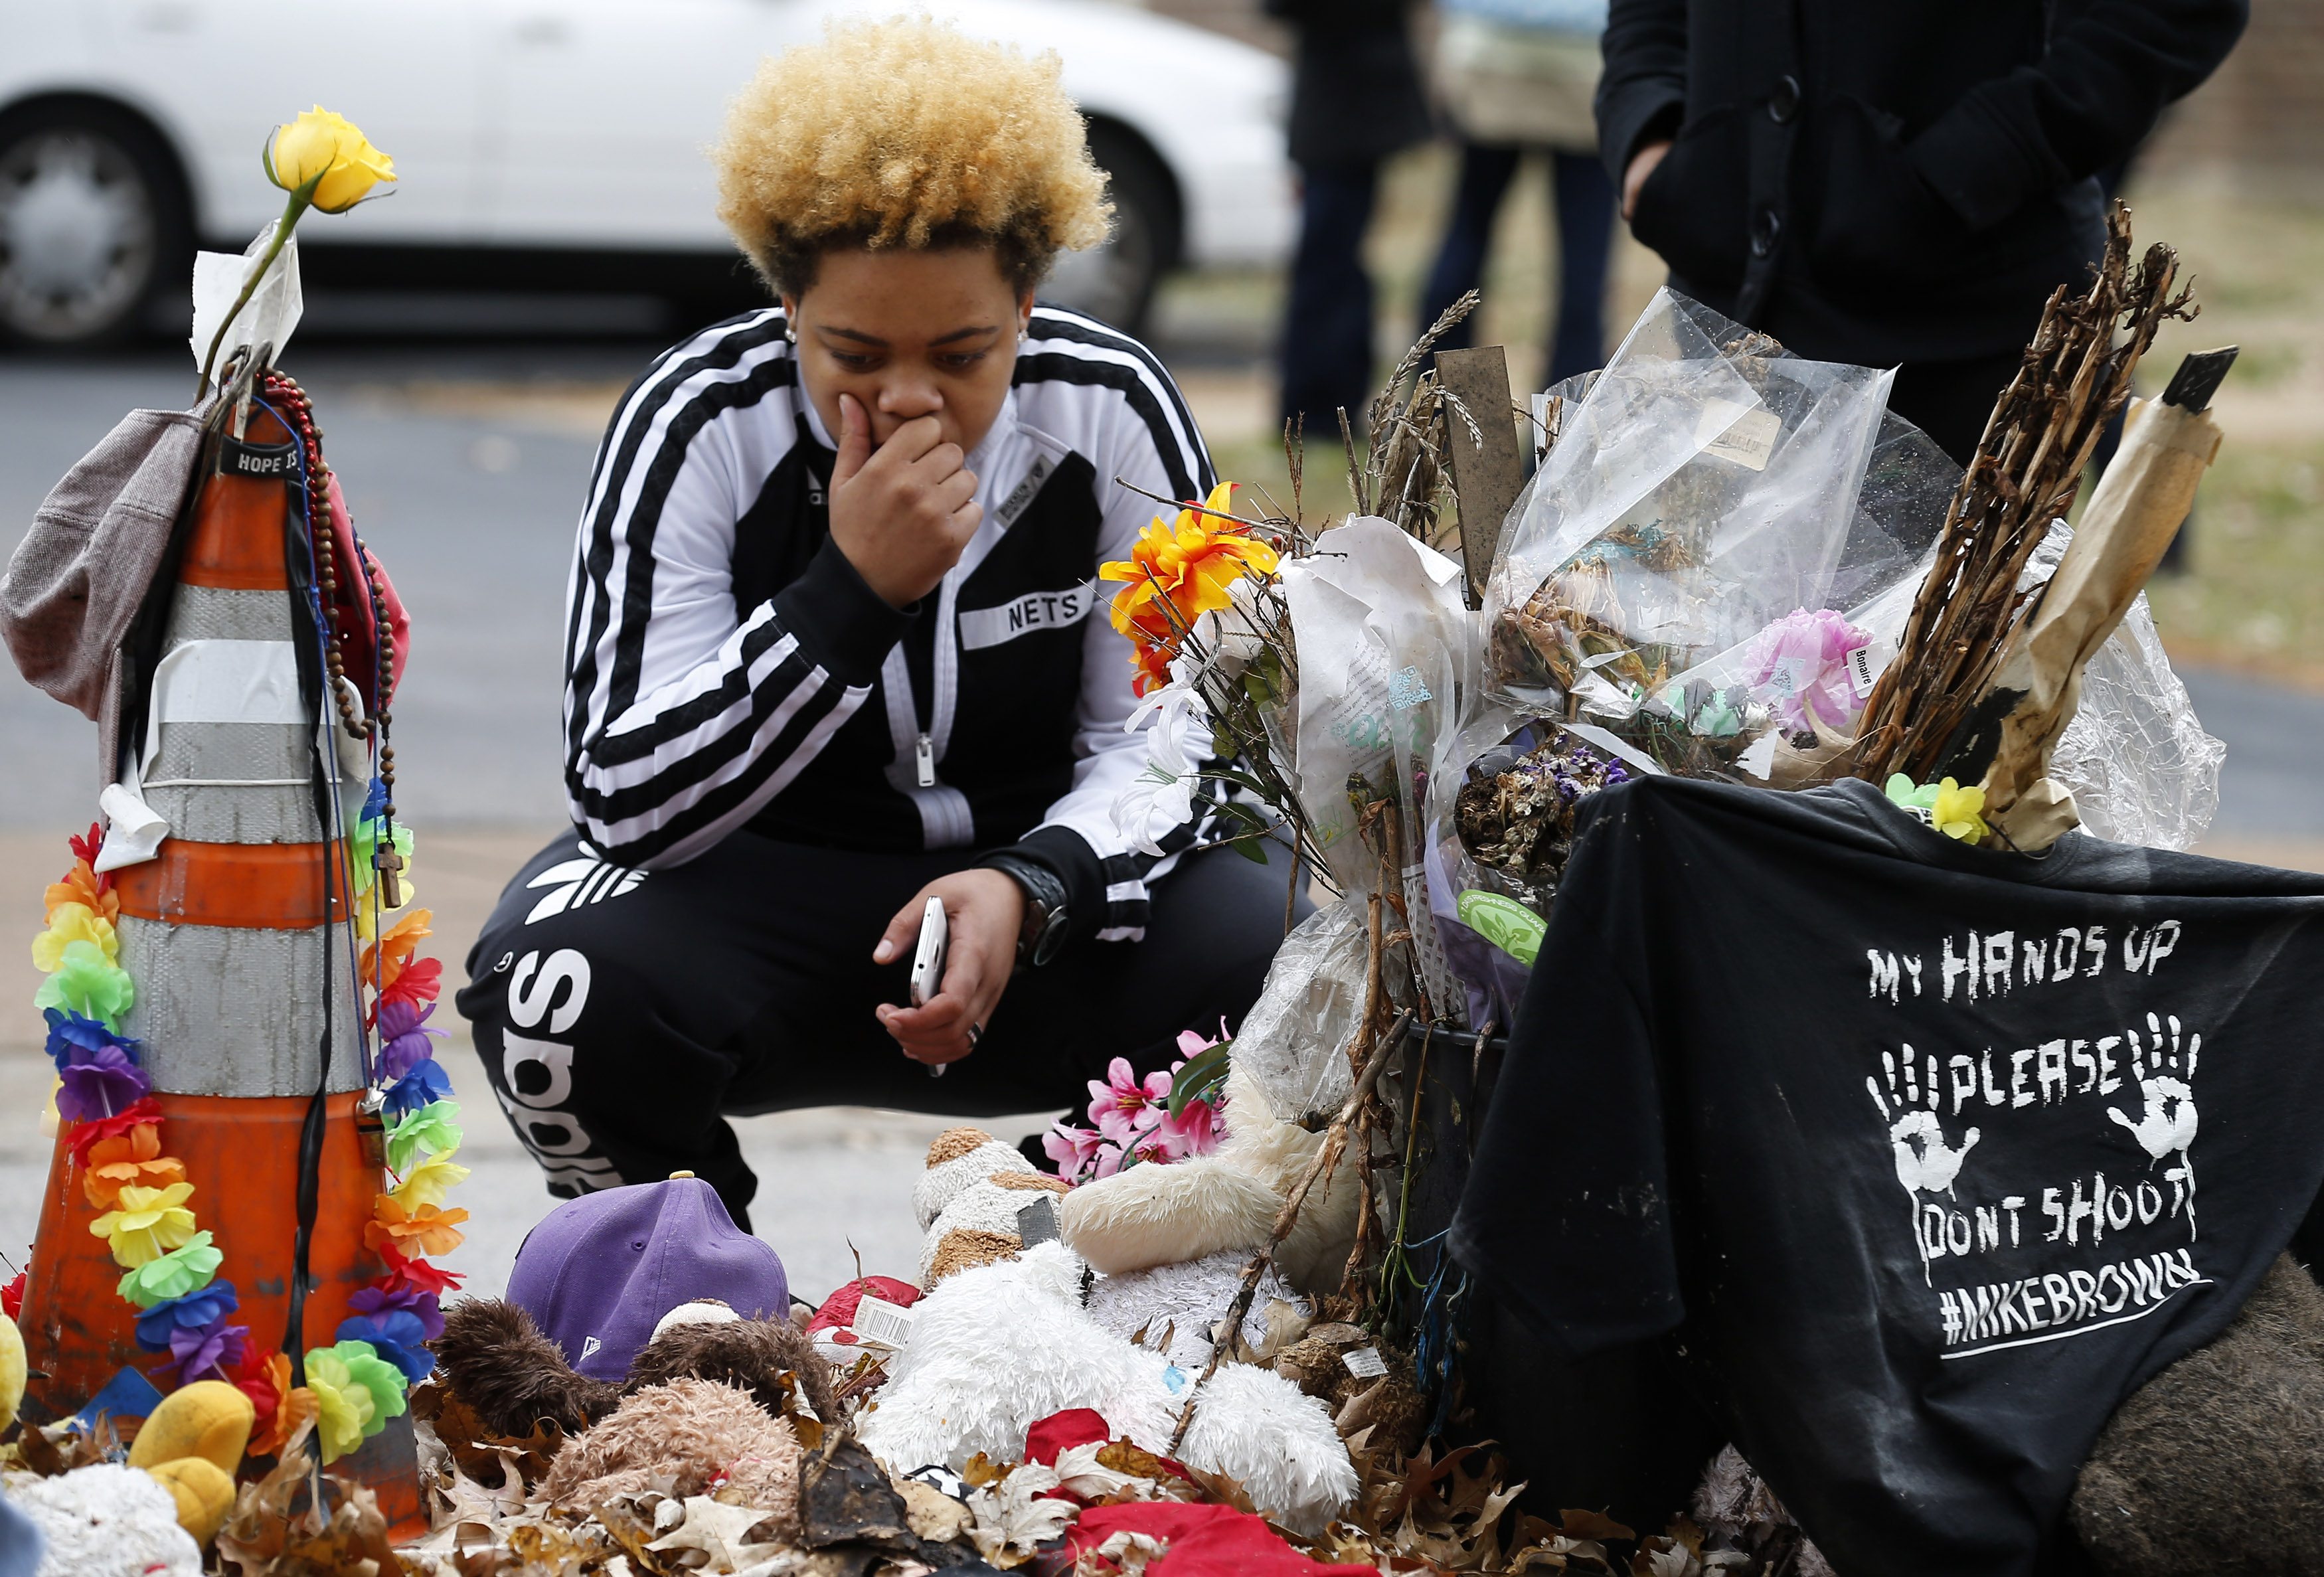 A woman stops to visit the memorial set up where Michael Brown was shot and killed in Ferguson, Missouri, Nov. 22, 2014. (Jim Young—Reuters)